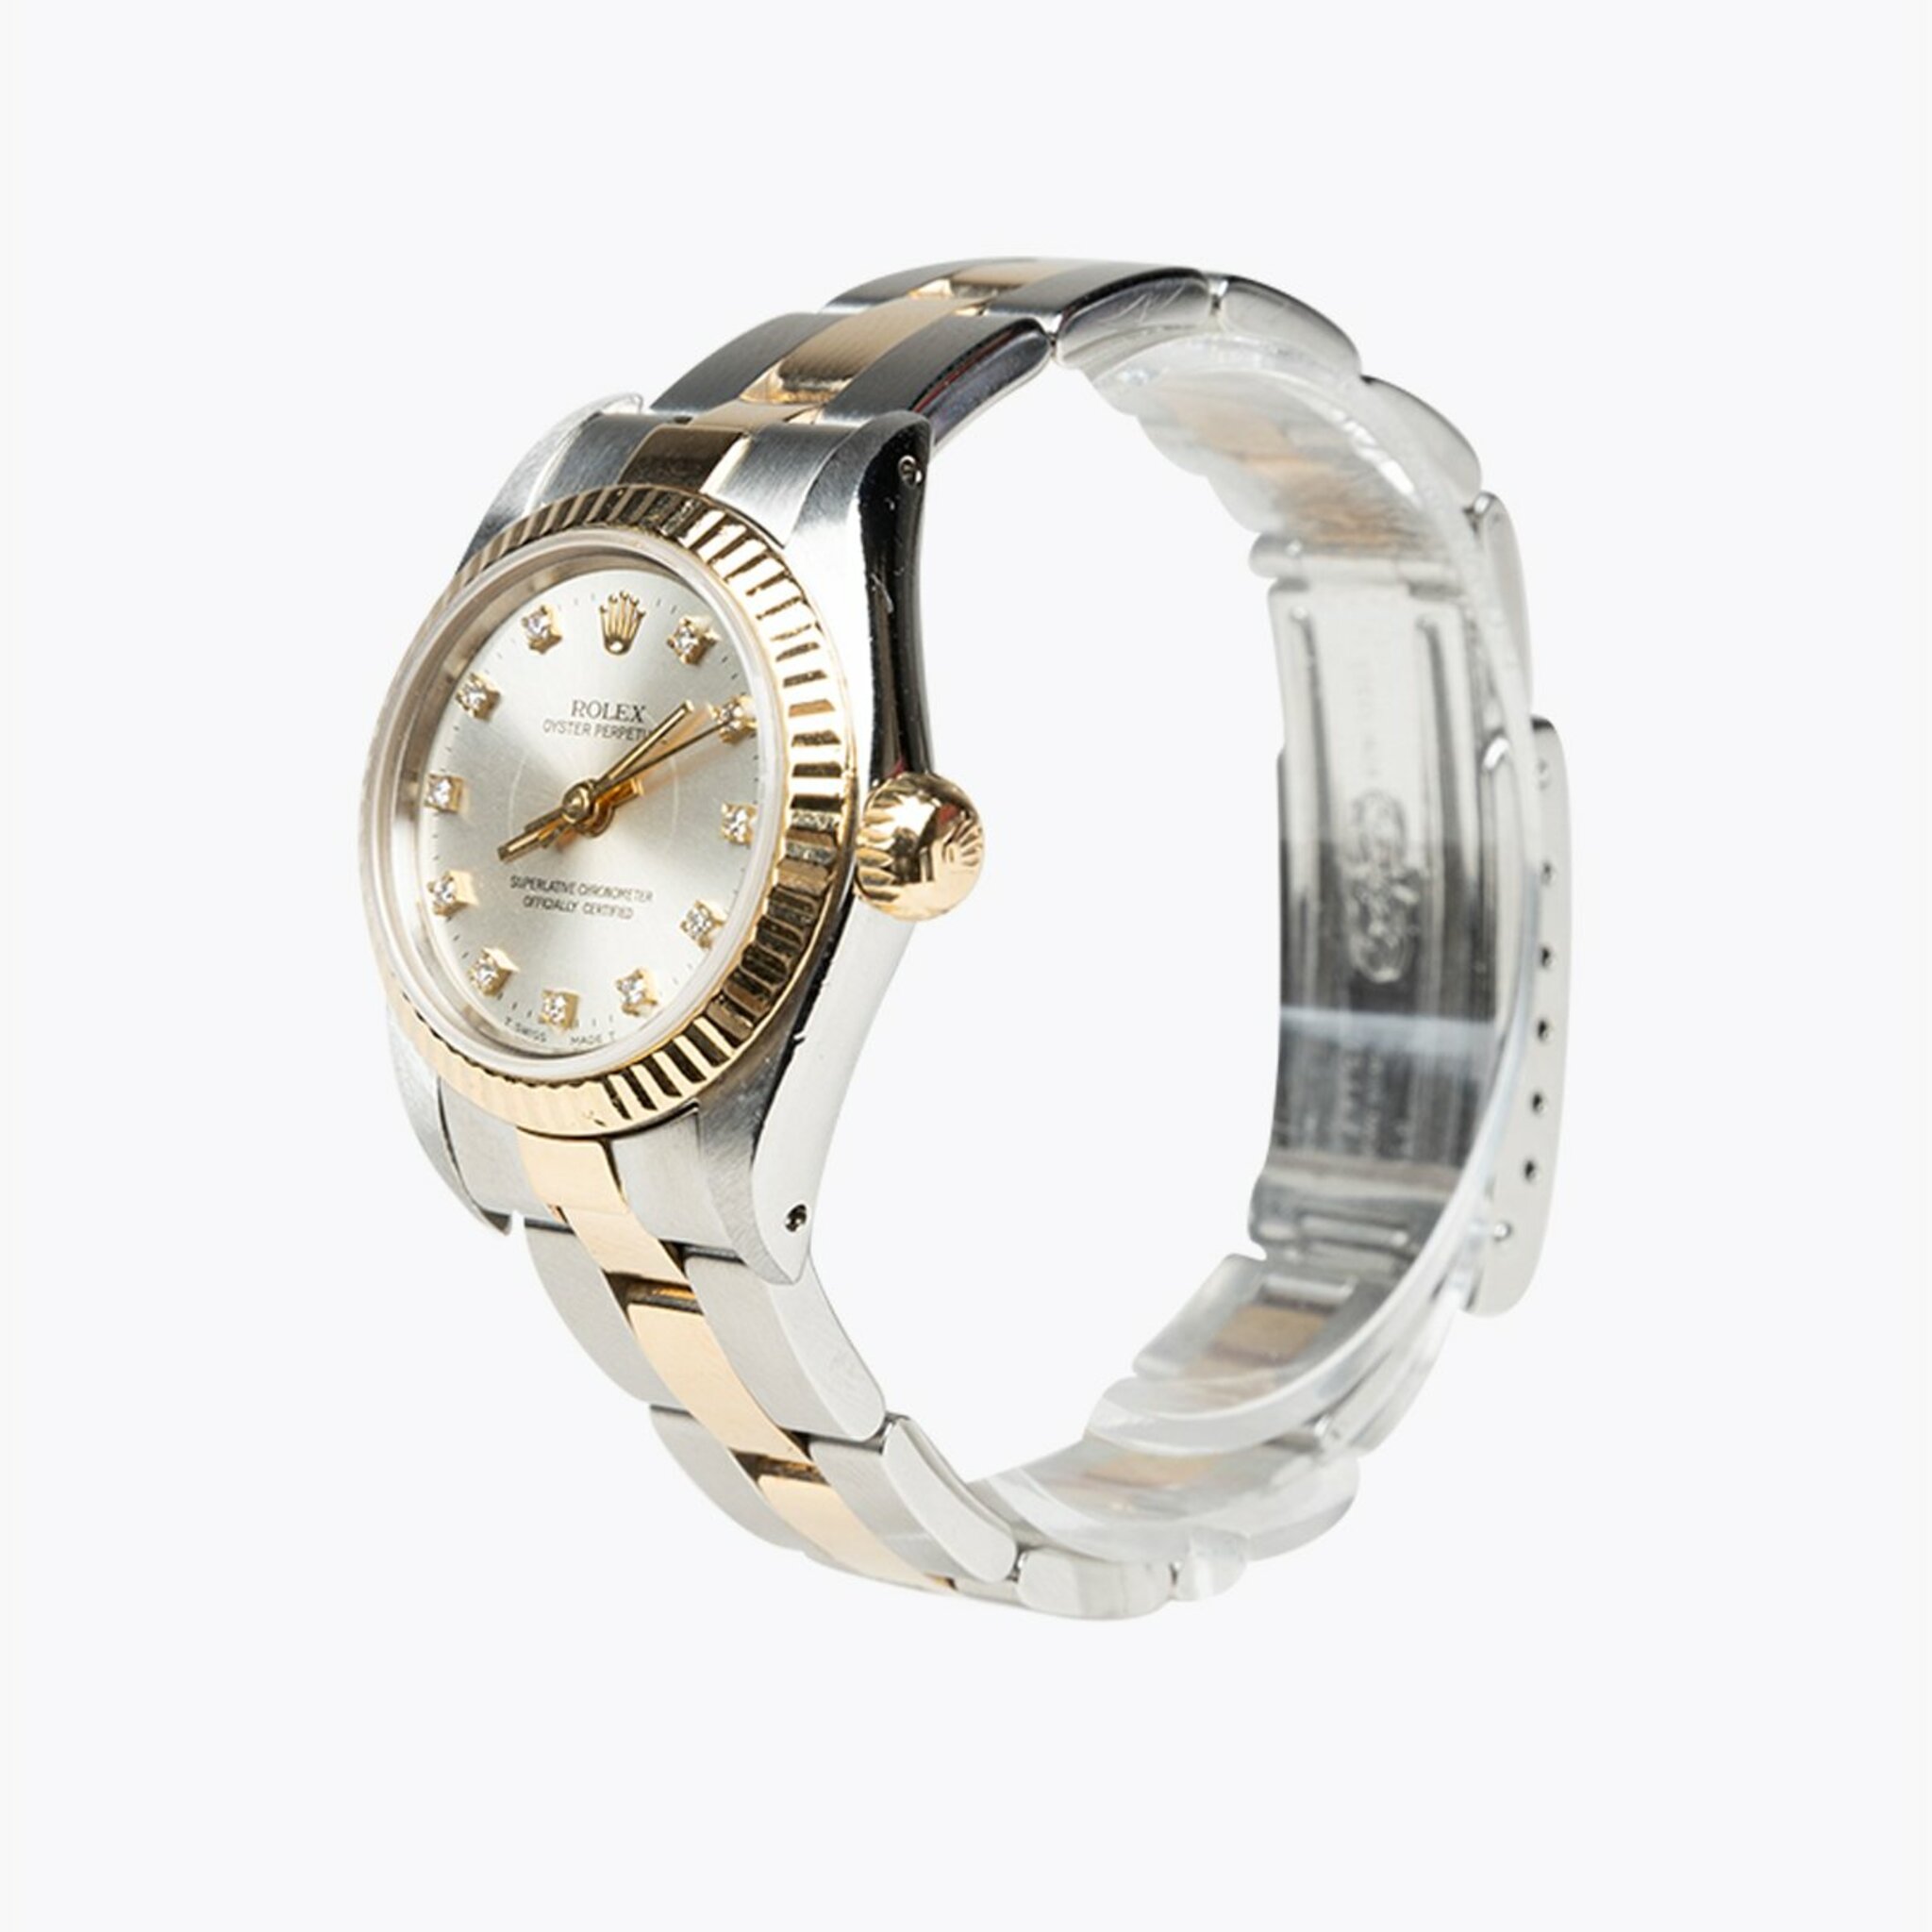 Rolex Datejust Oyster Perpetual Watch